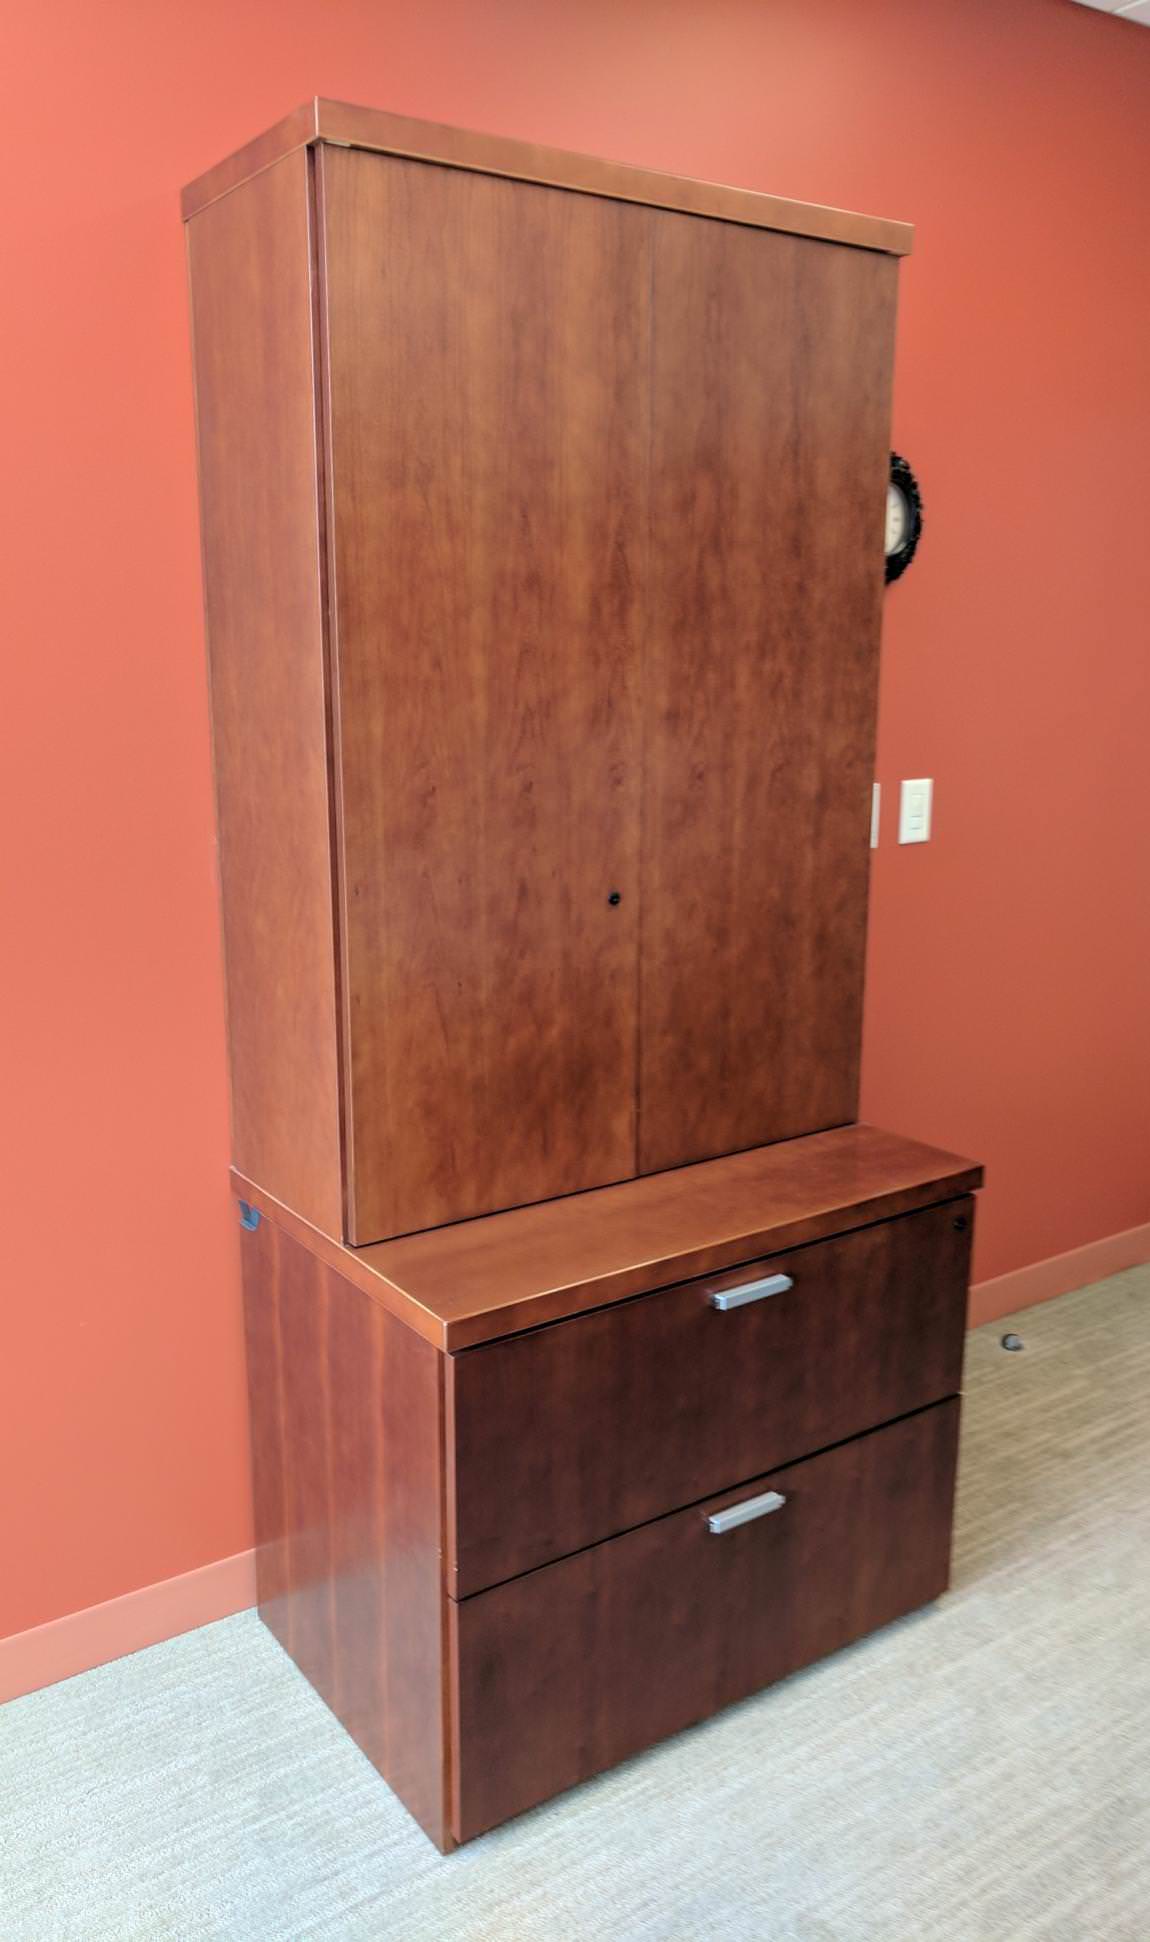 2Dr 36 1/2"W x 19 1/2"D x 28 1/2"H Lateral file cabinet in Cherry finish wood 